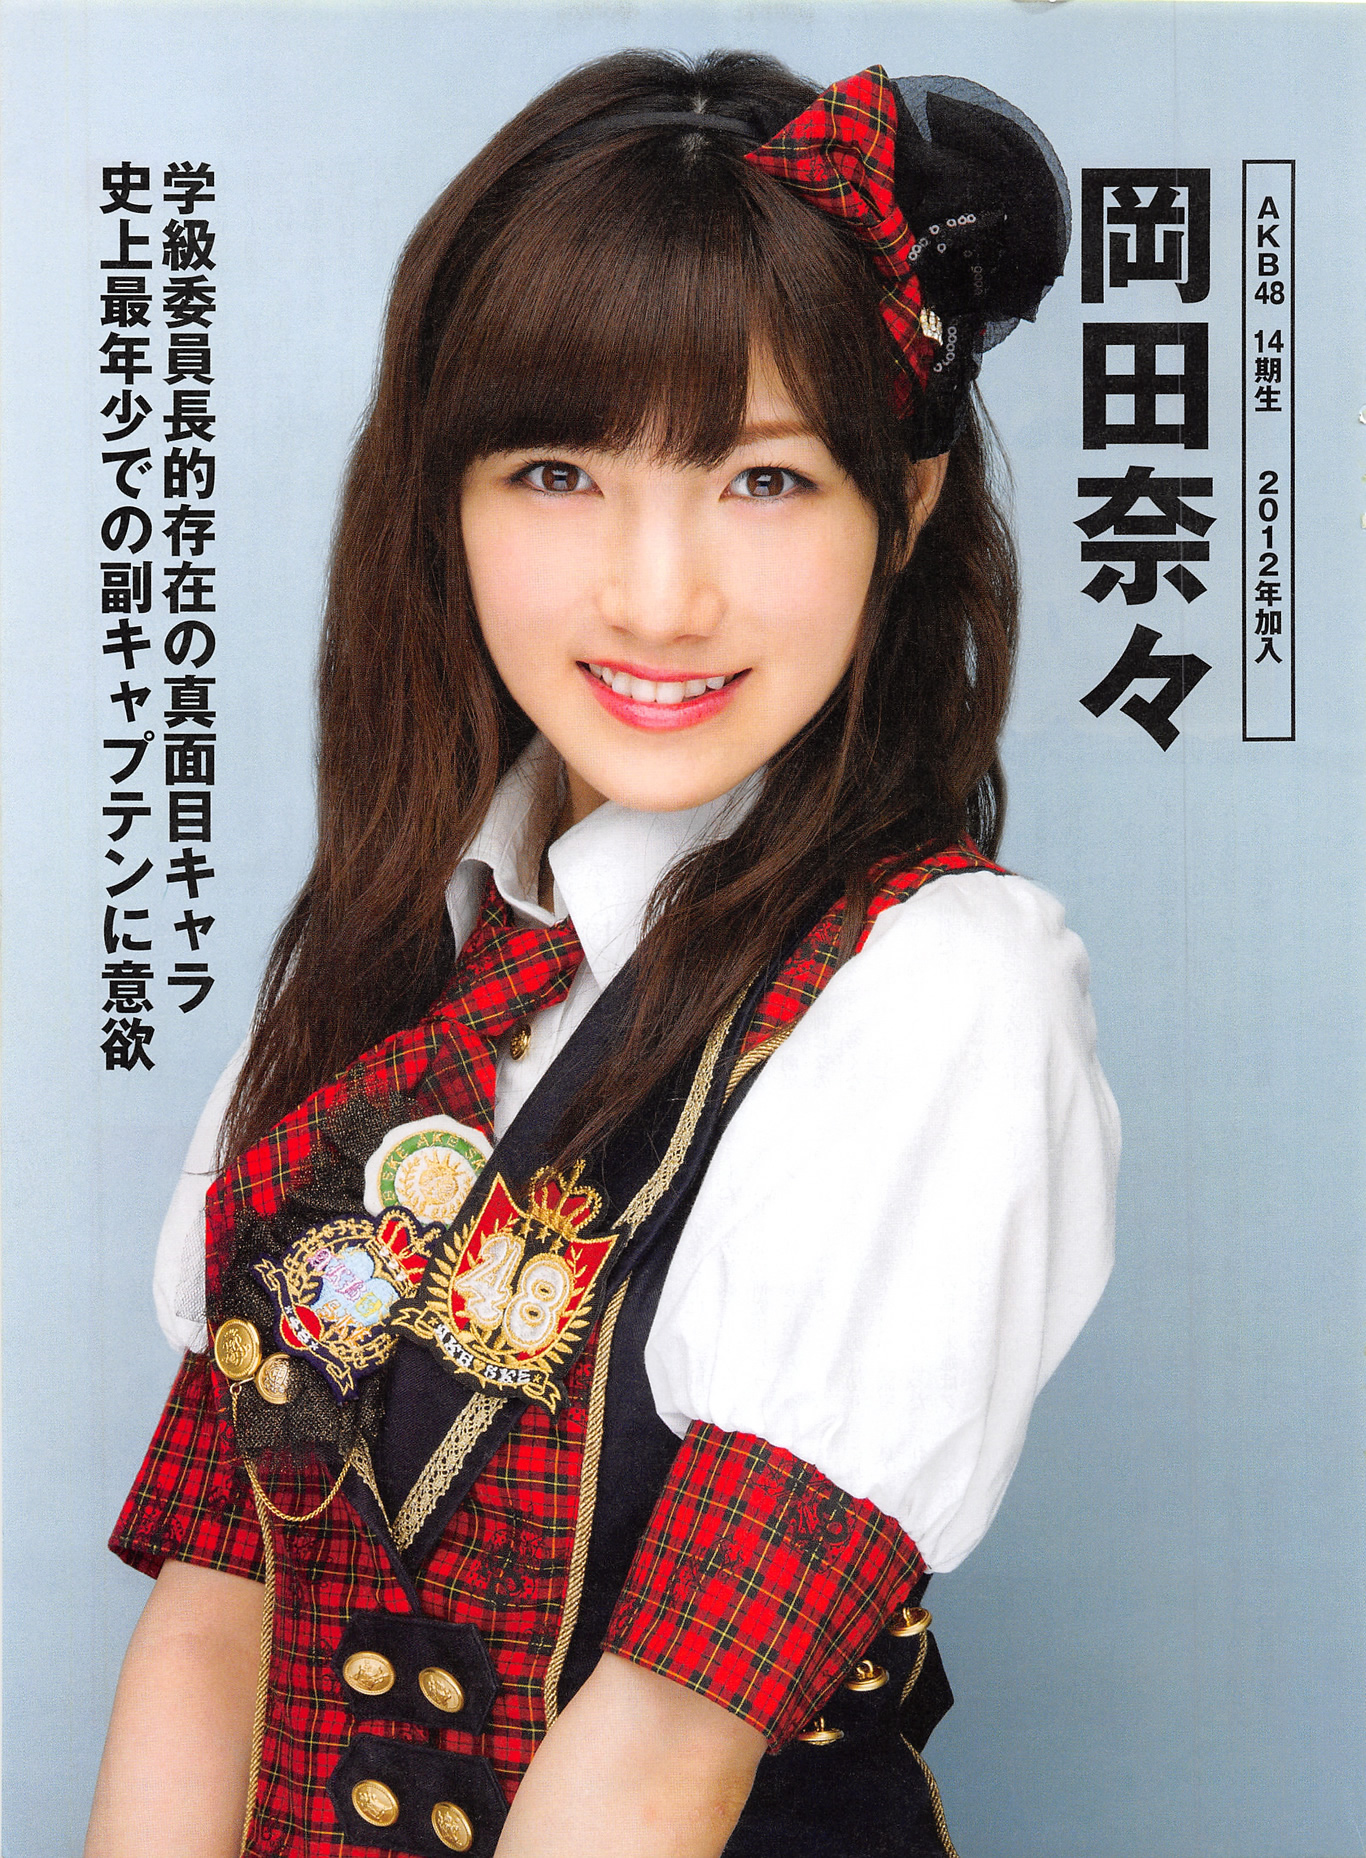 Nikkei Entertainment Akb48 10th Anniversary Special